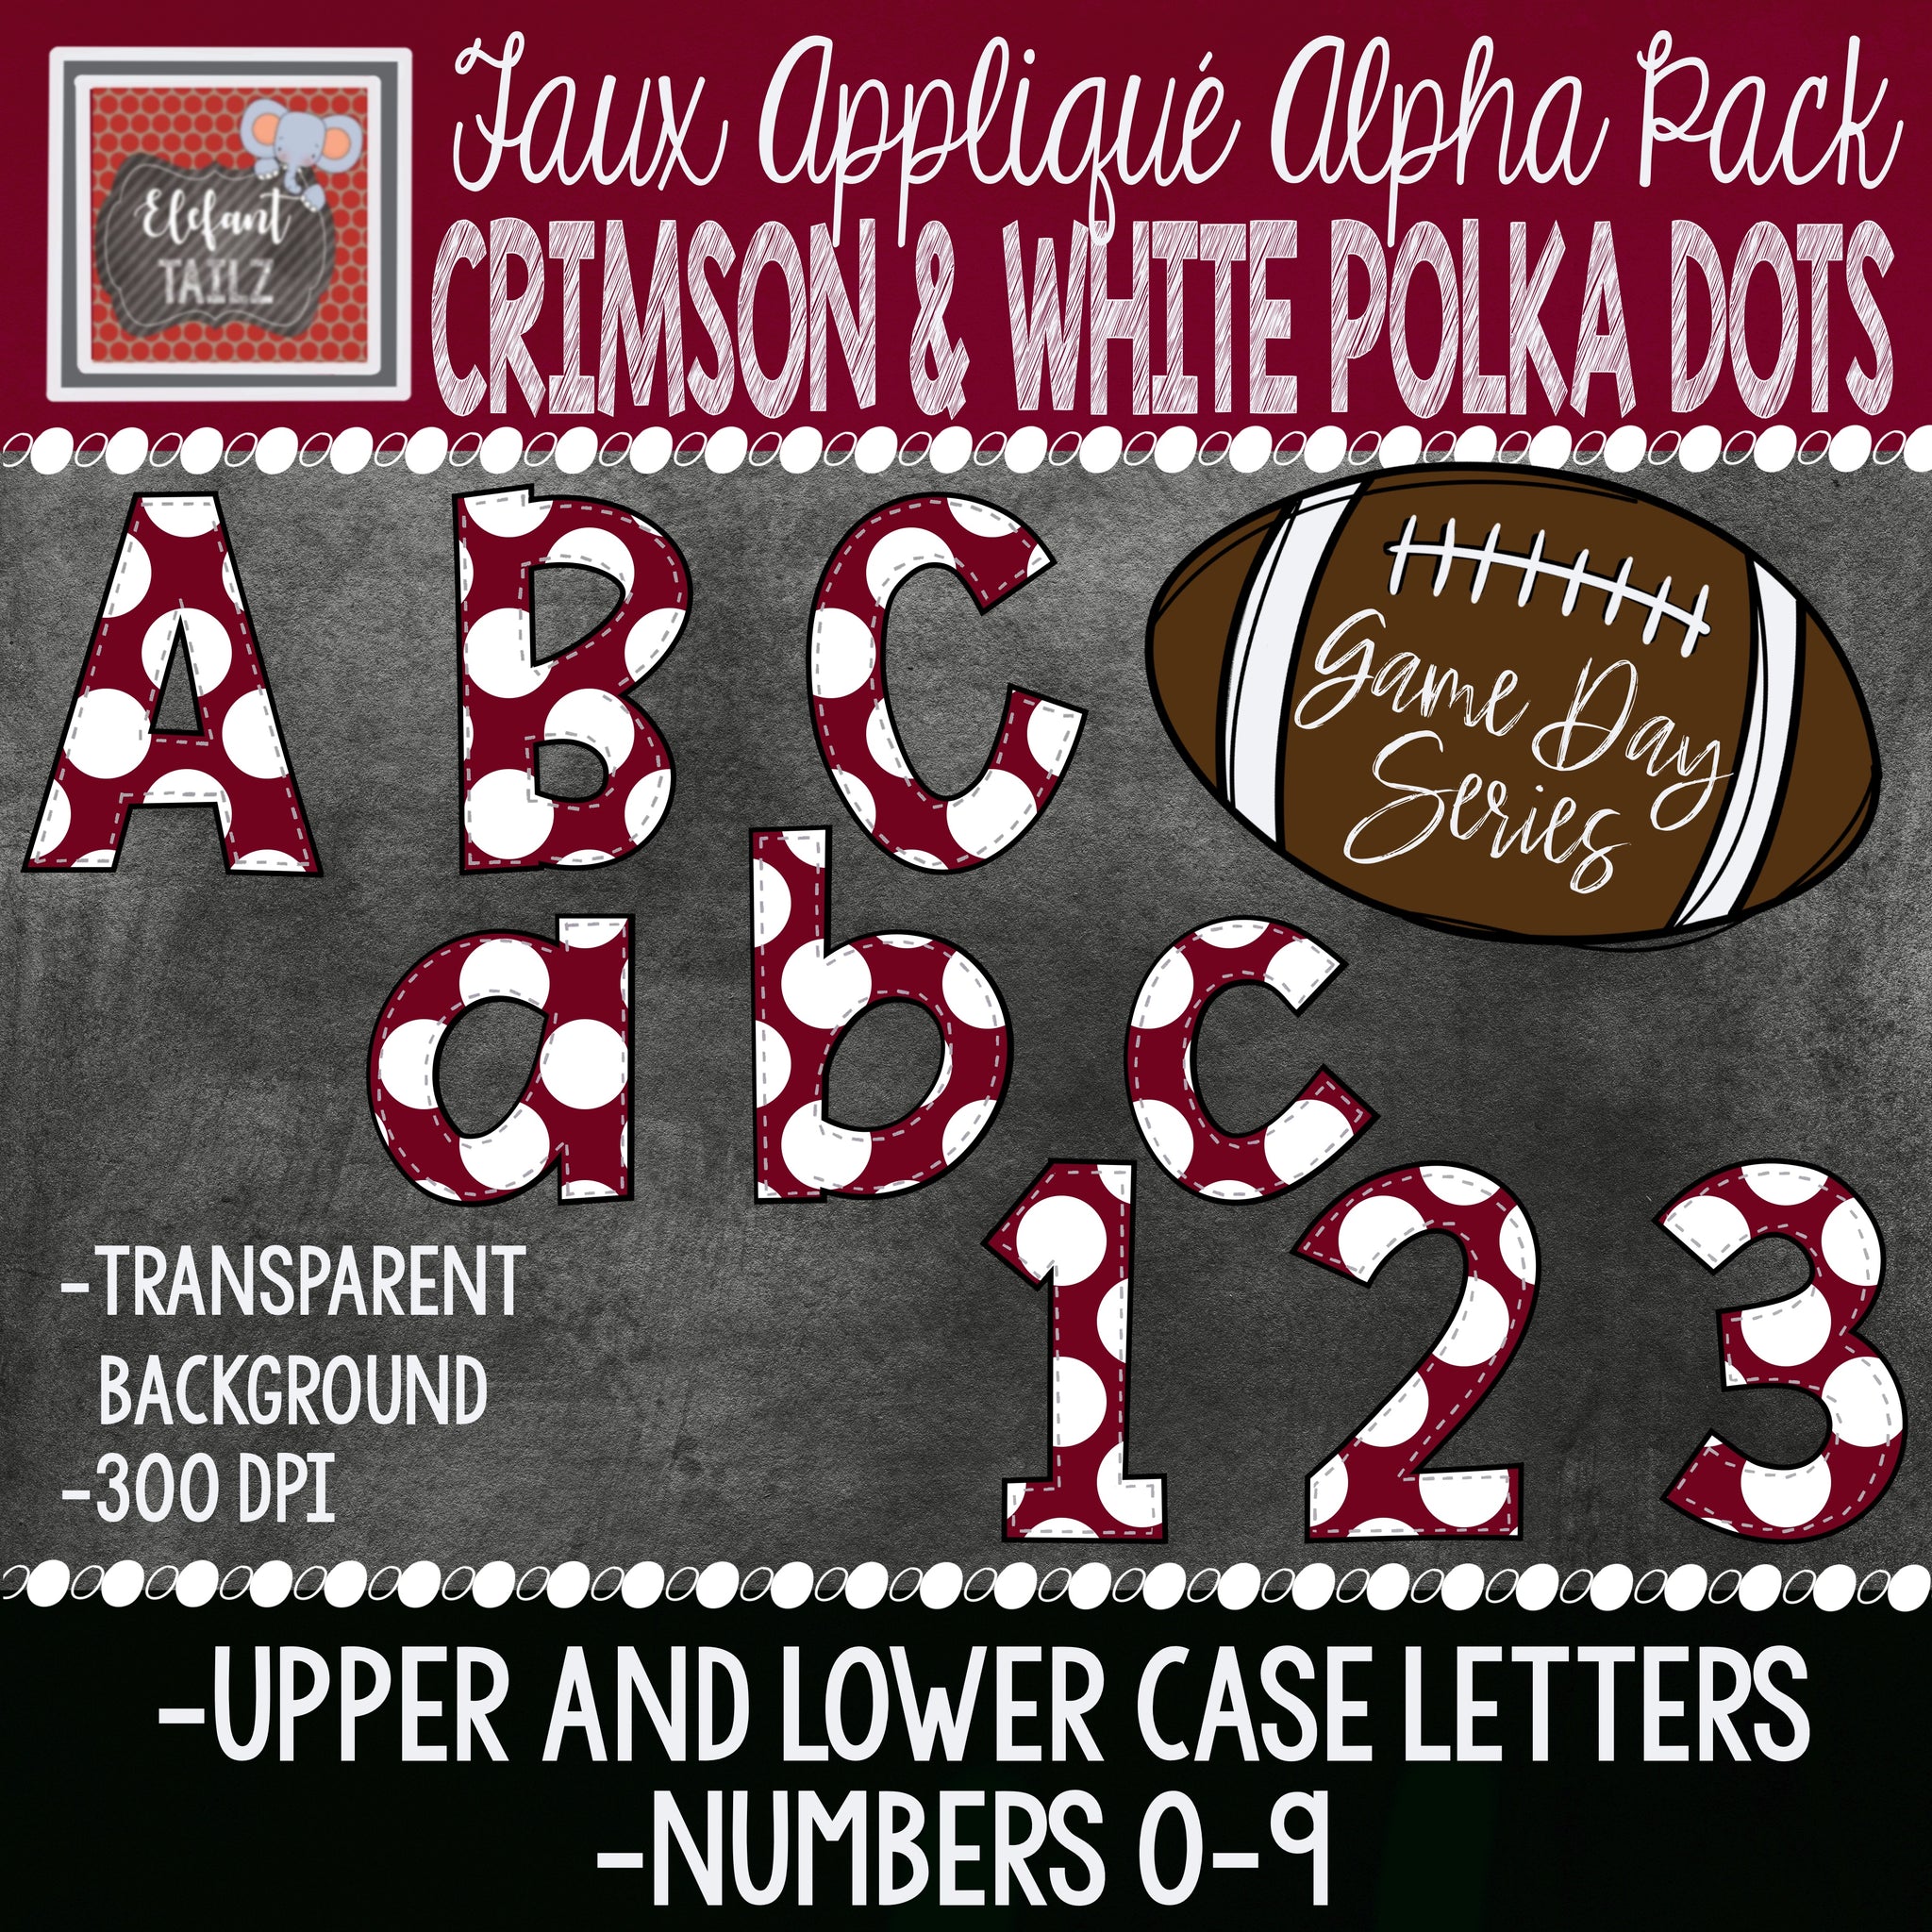 Game Day Series Alpha & Number Pack - Crimson & White Polka Dots